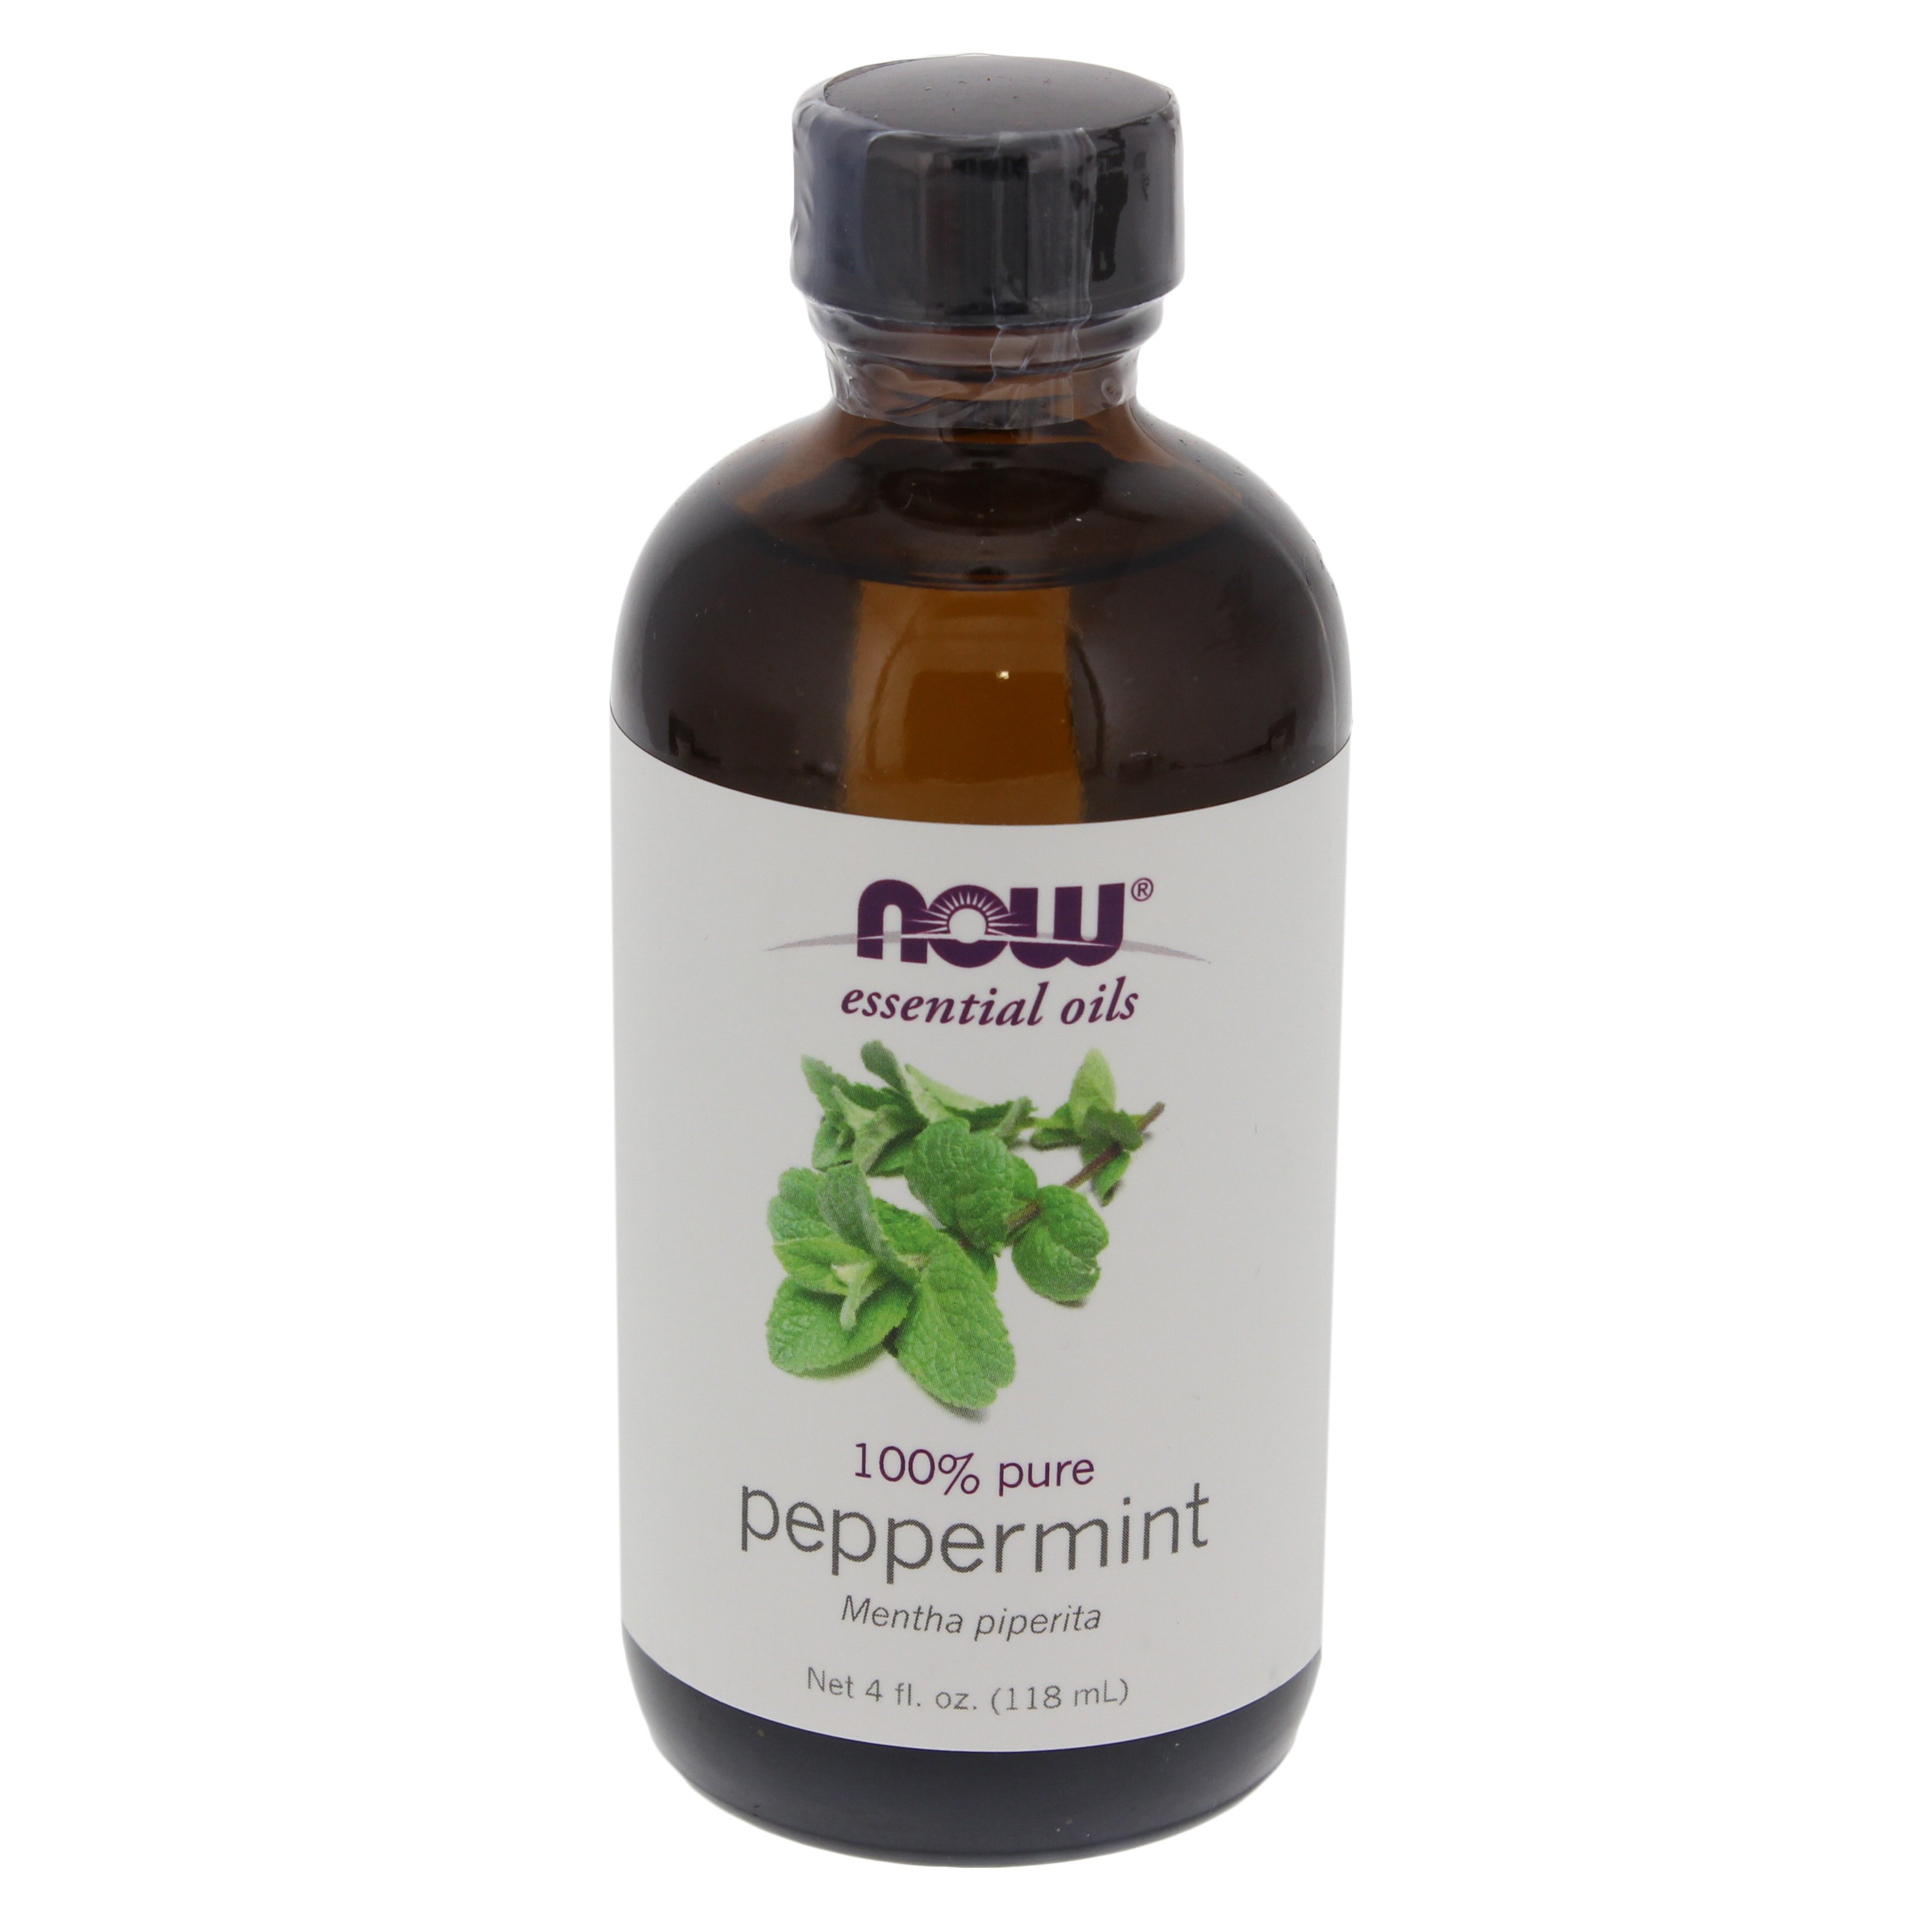 Buy Peppermint Essential Oil - 100% Pure & Organic & Get 30% Cashback  Today, 50,000+ Happy Customers